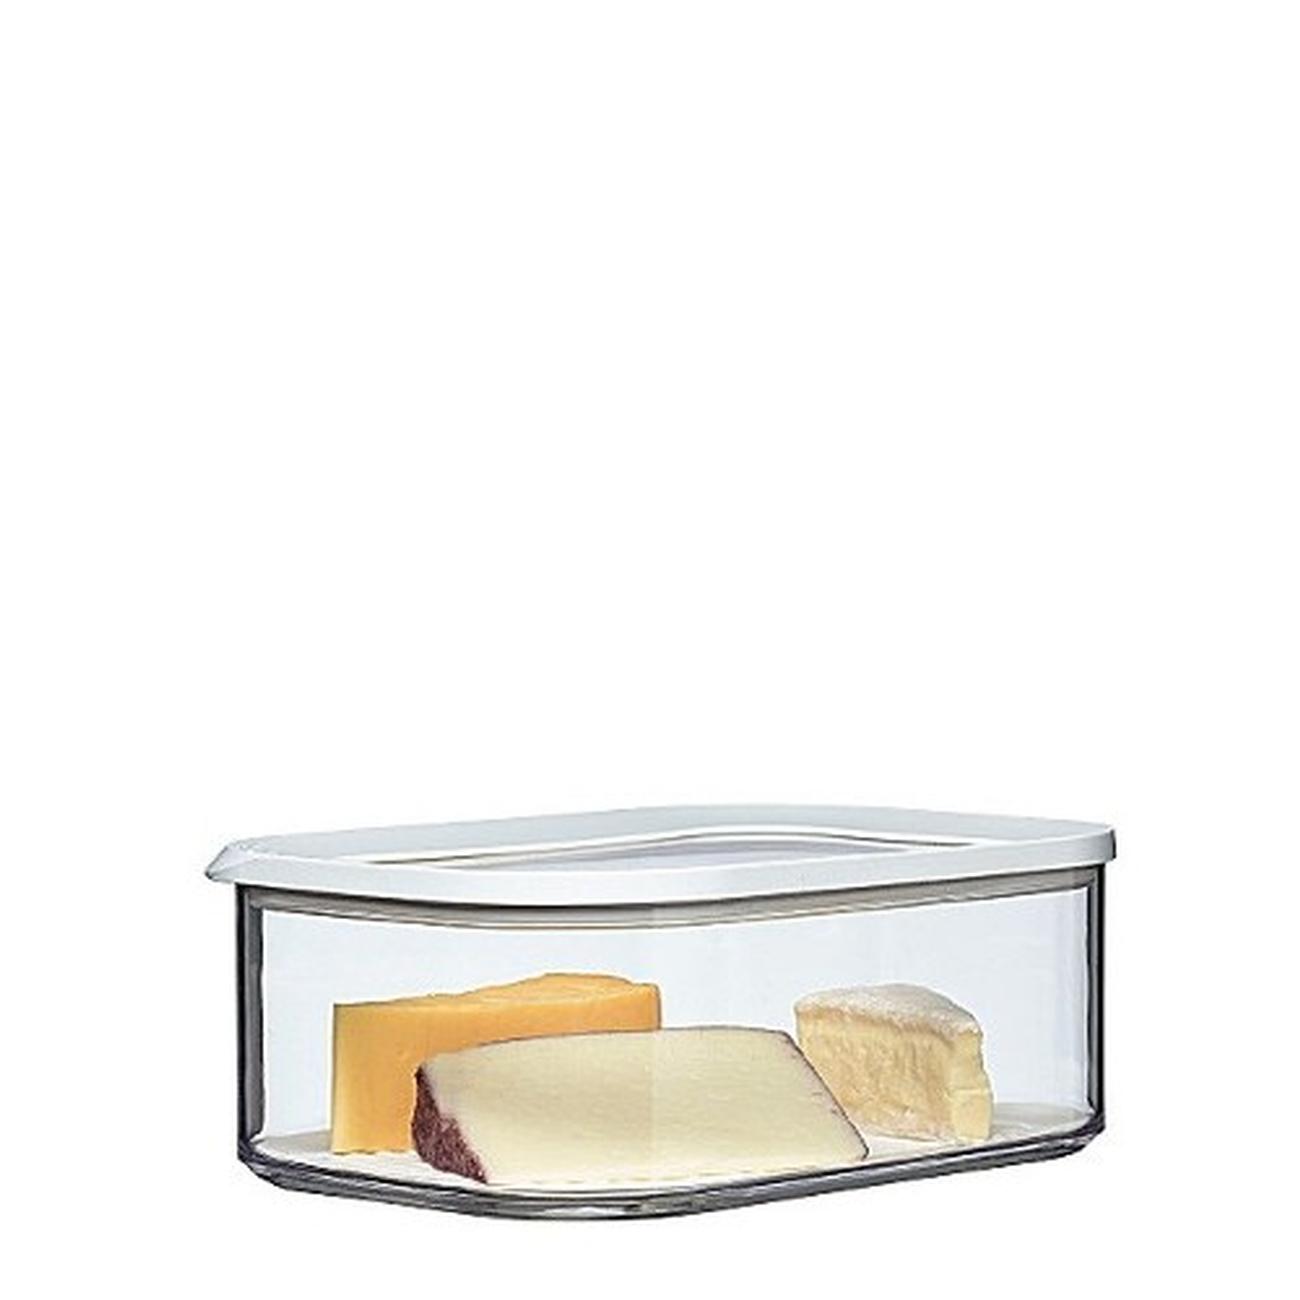 https://www.thekitchenwhisk.ie/contentfiles/productImages/Large/Mepal-Modula-Cheese-Storage-Box-1.jpg